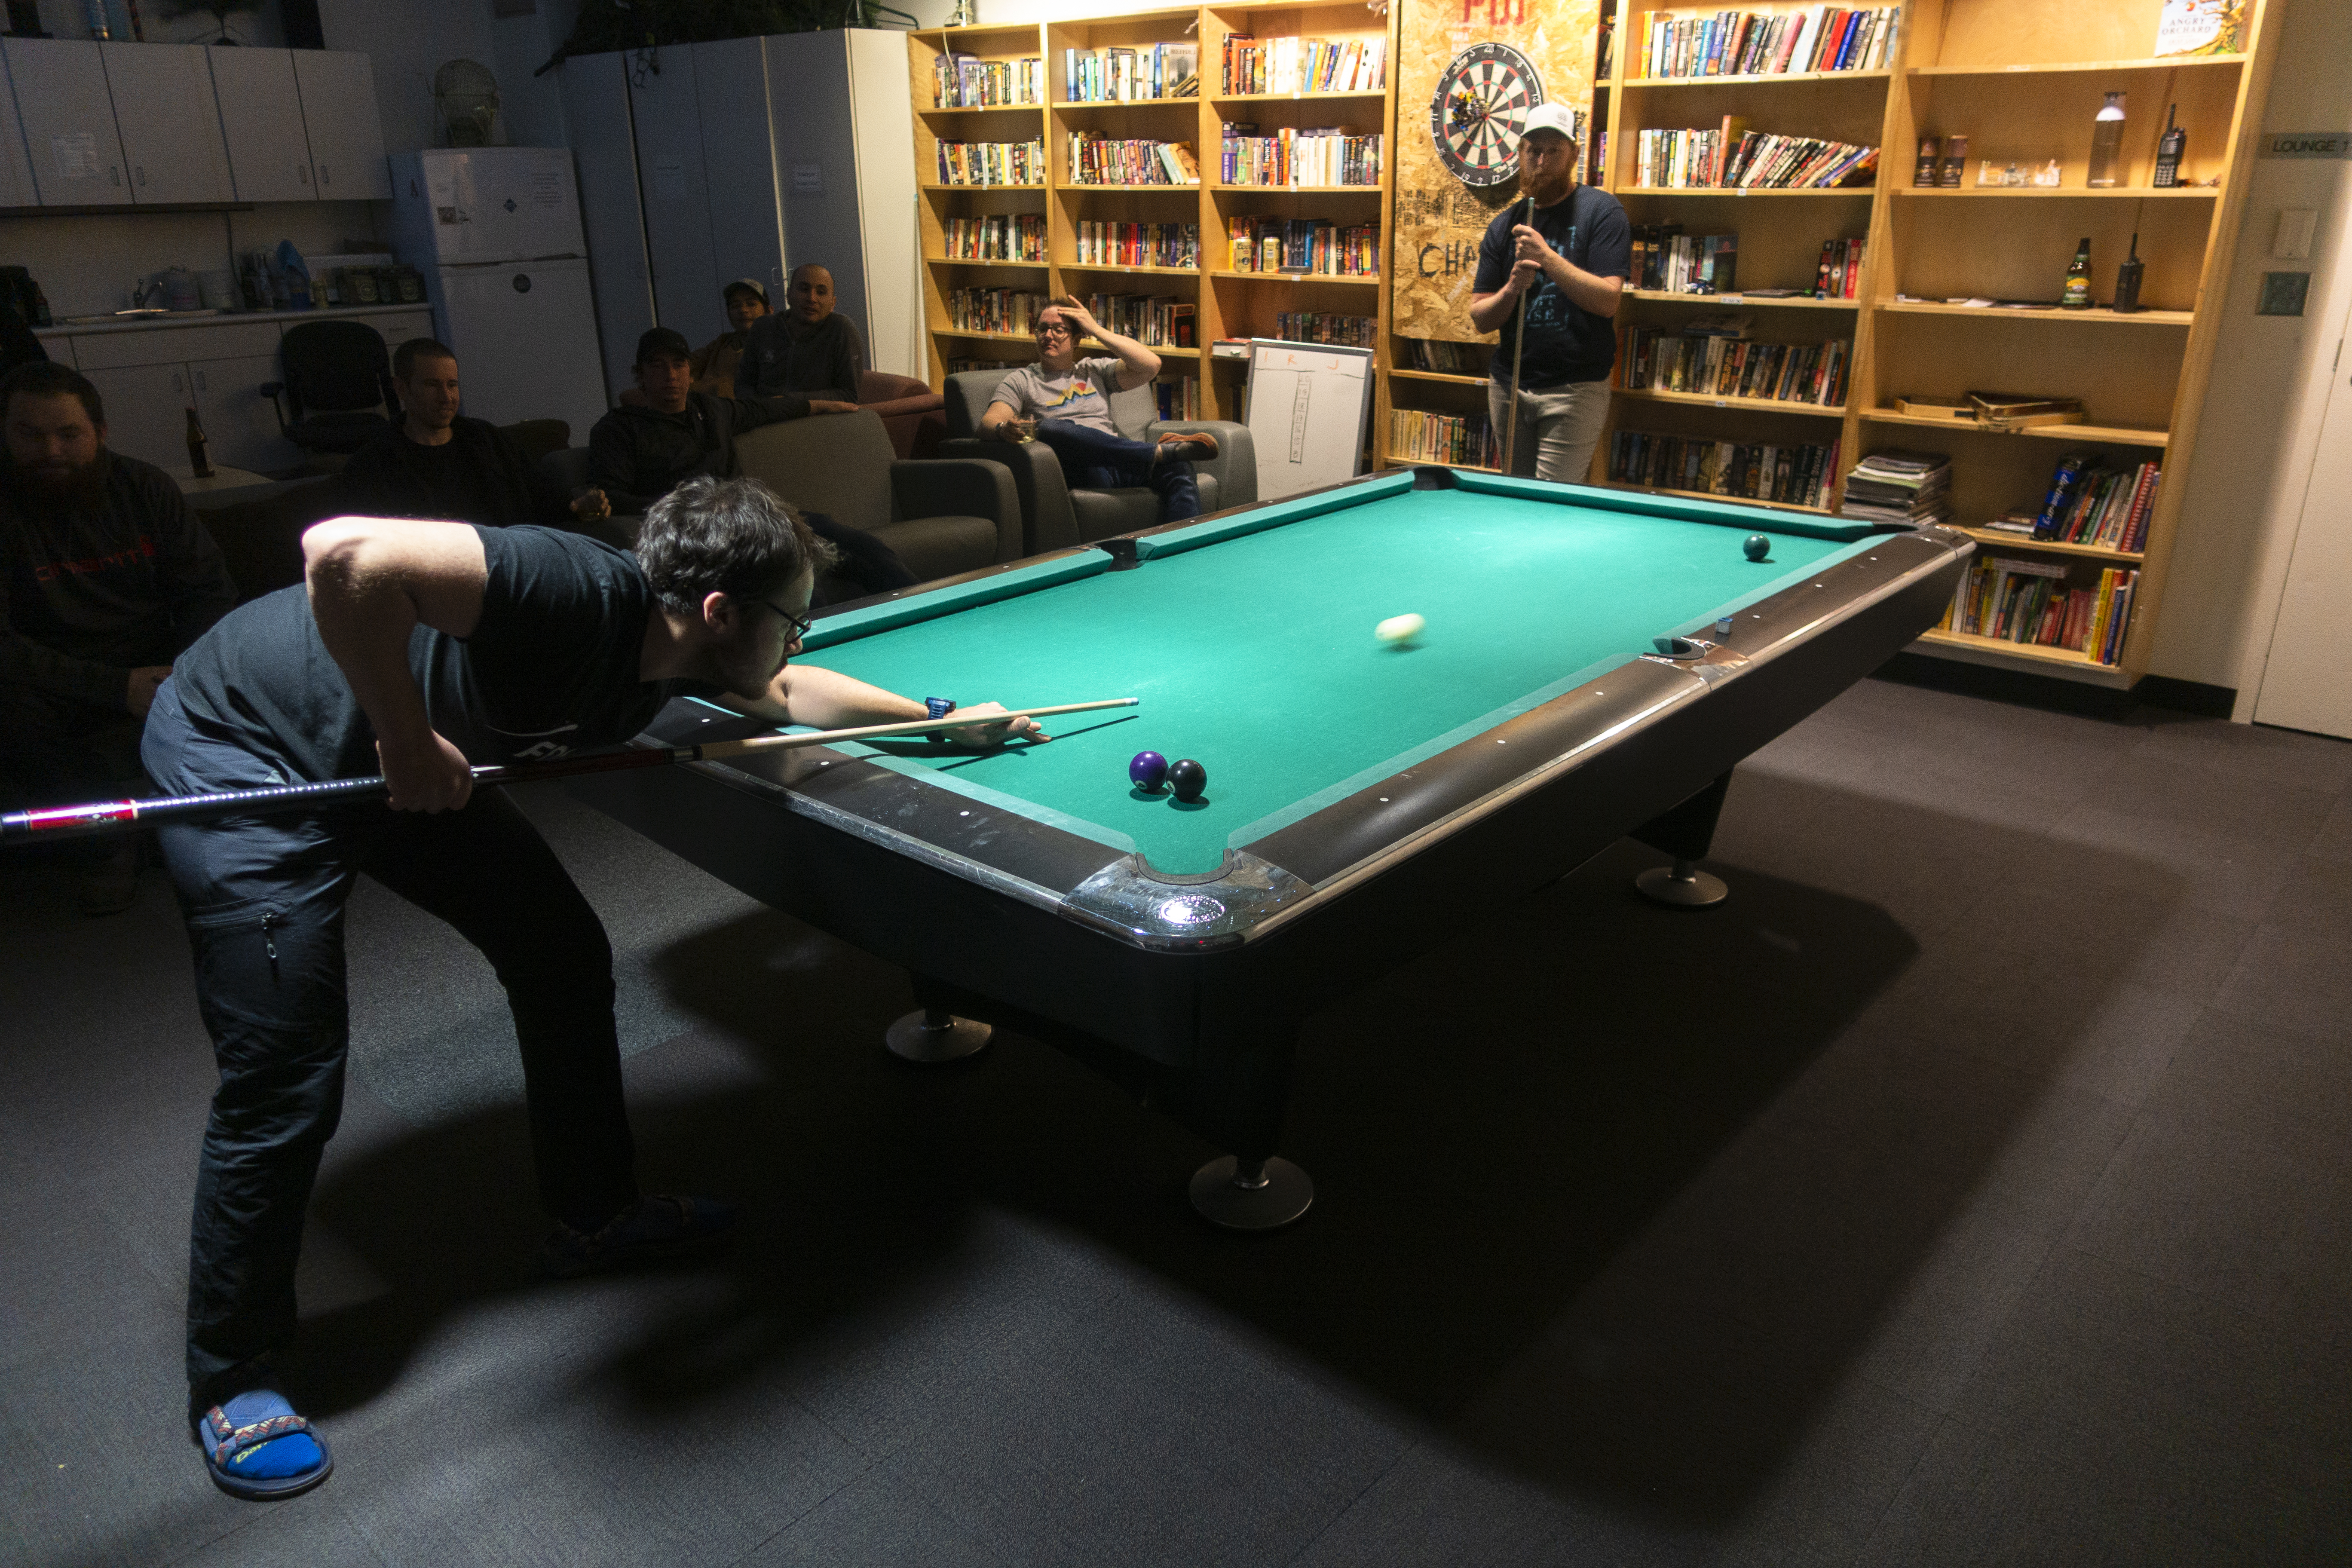 Person bent over pool table in middle of a shot.